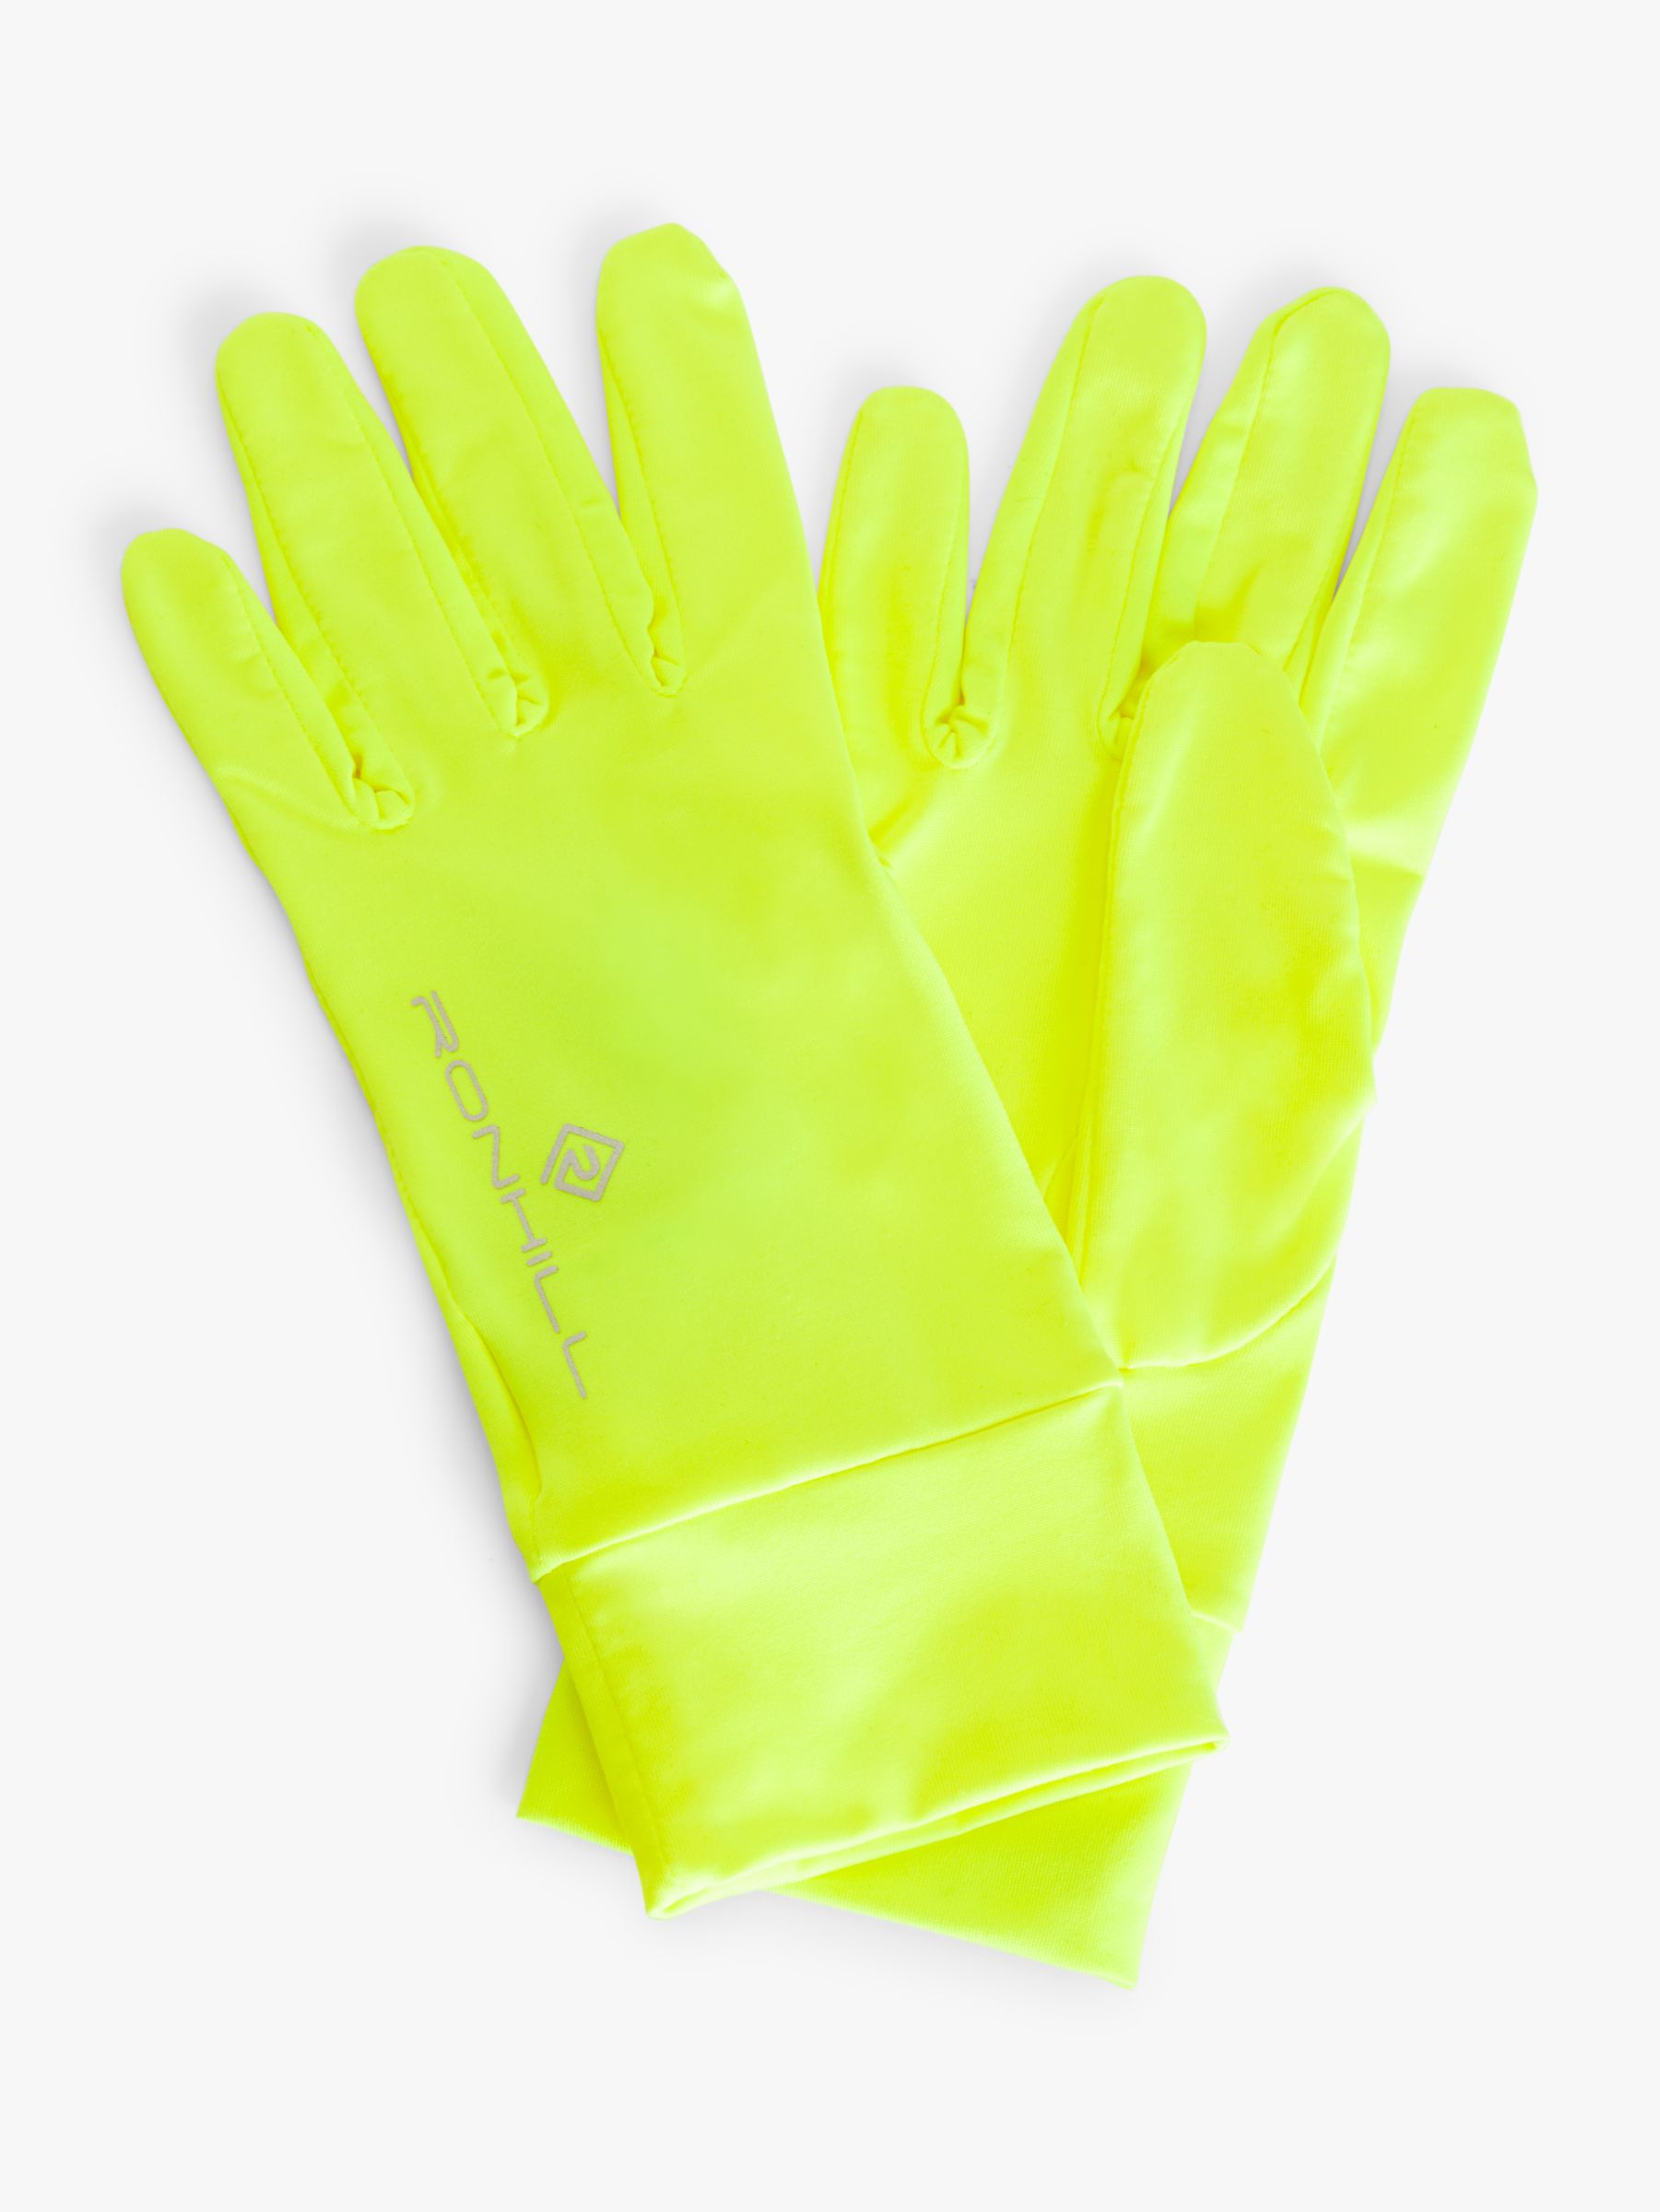 Buy Ronhill Classic Running Gloves, Charcoal/Reflect Yellow Online at johnlewis.com